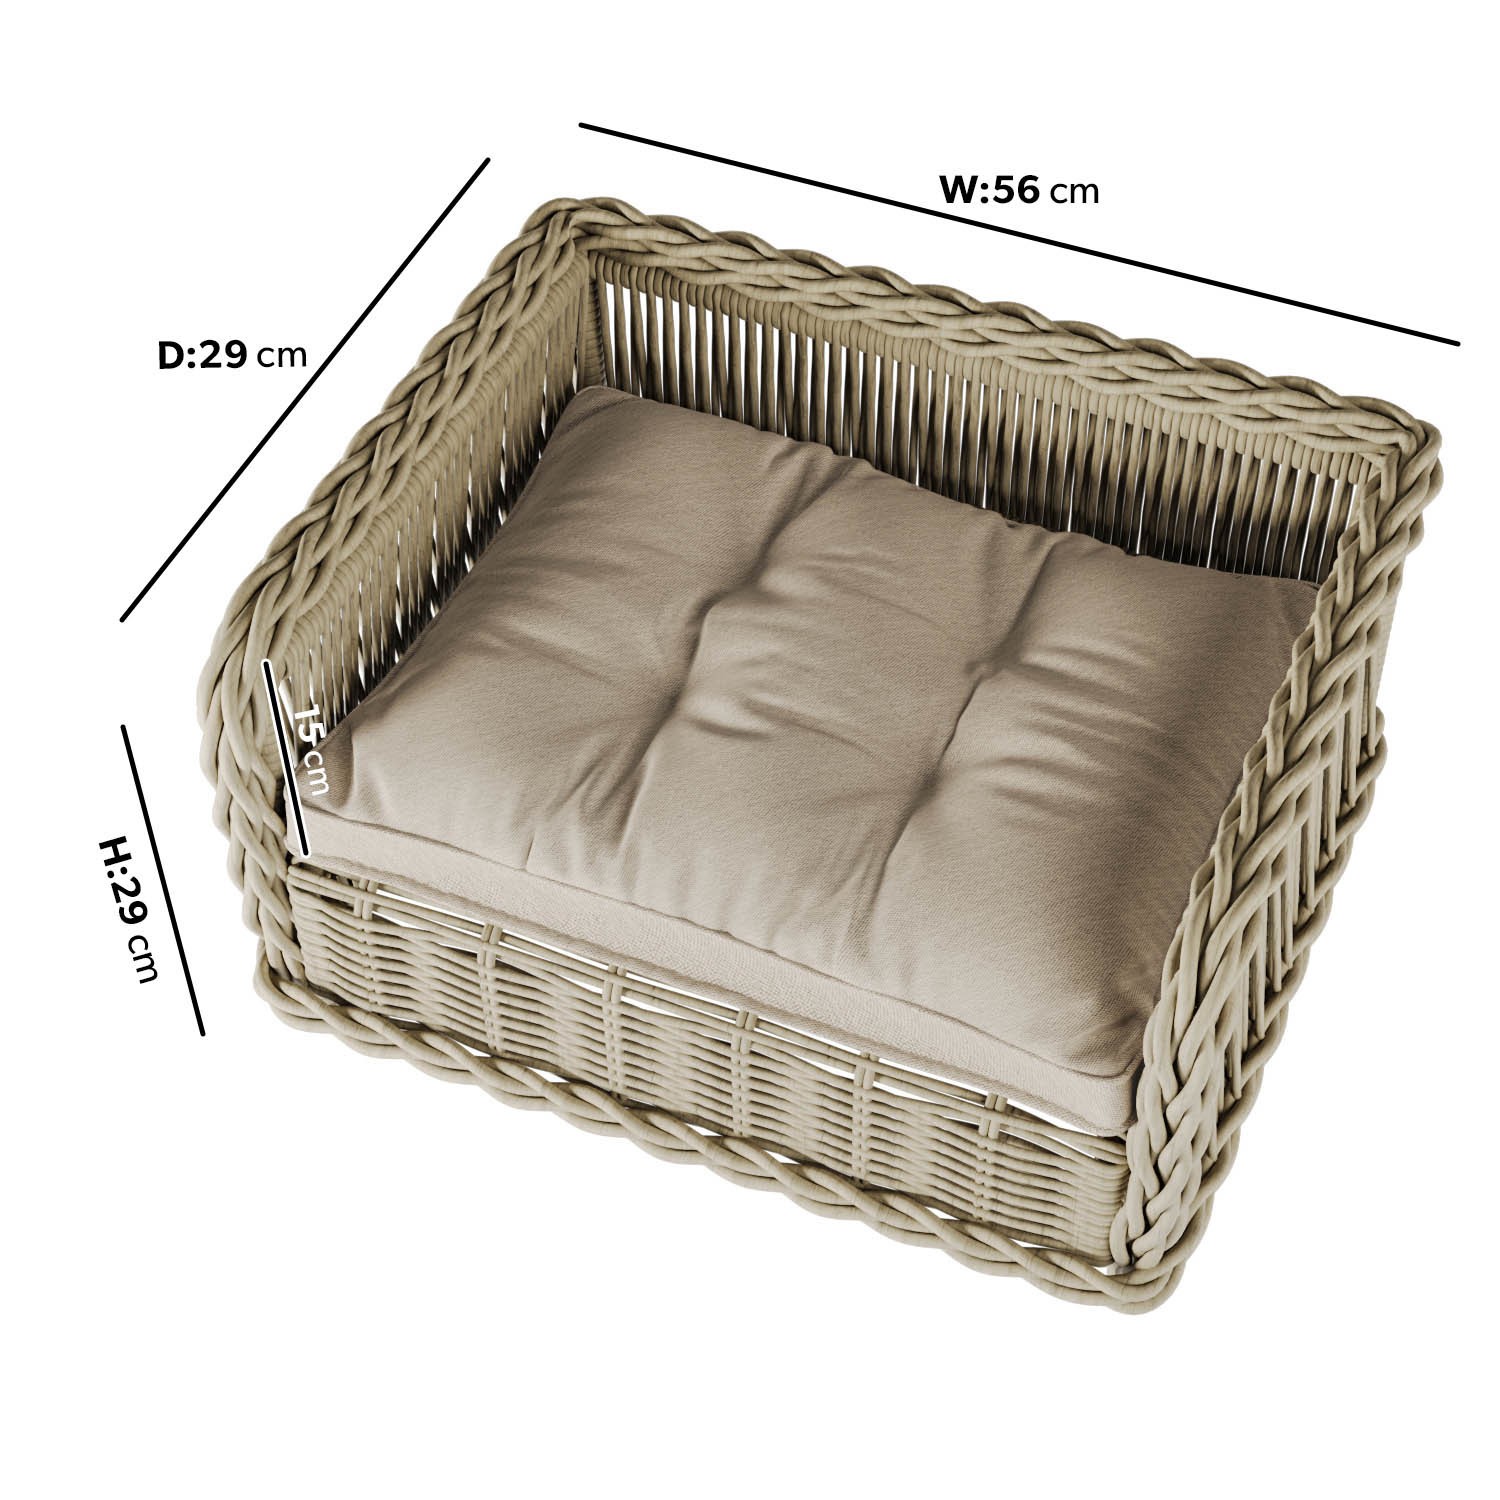 Read more about Small rattan outdoor pet bed